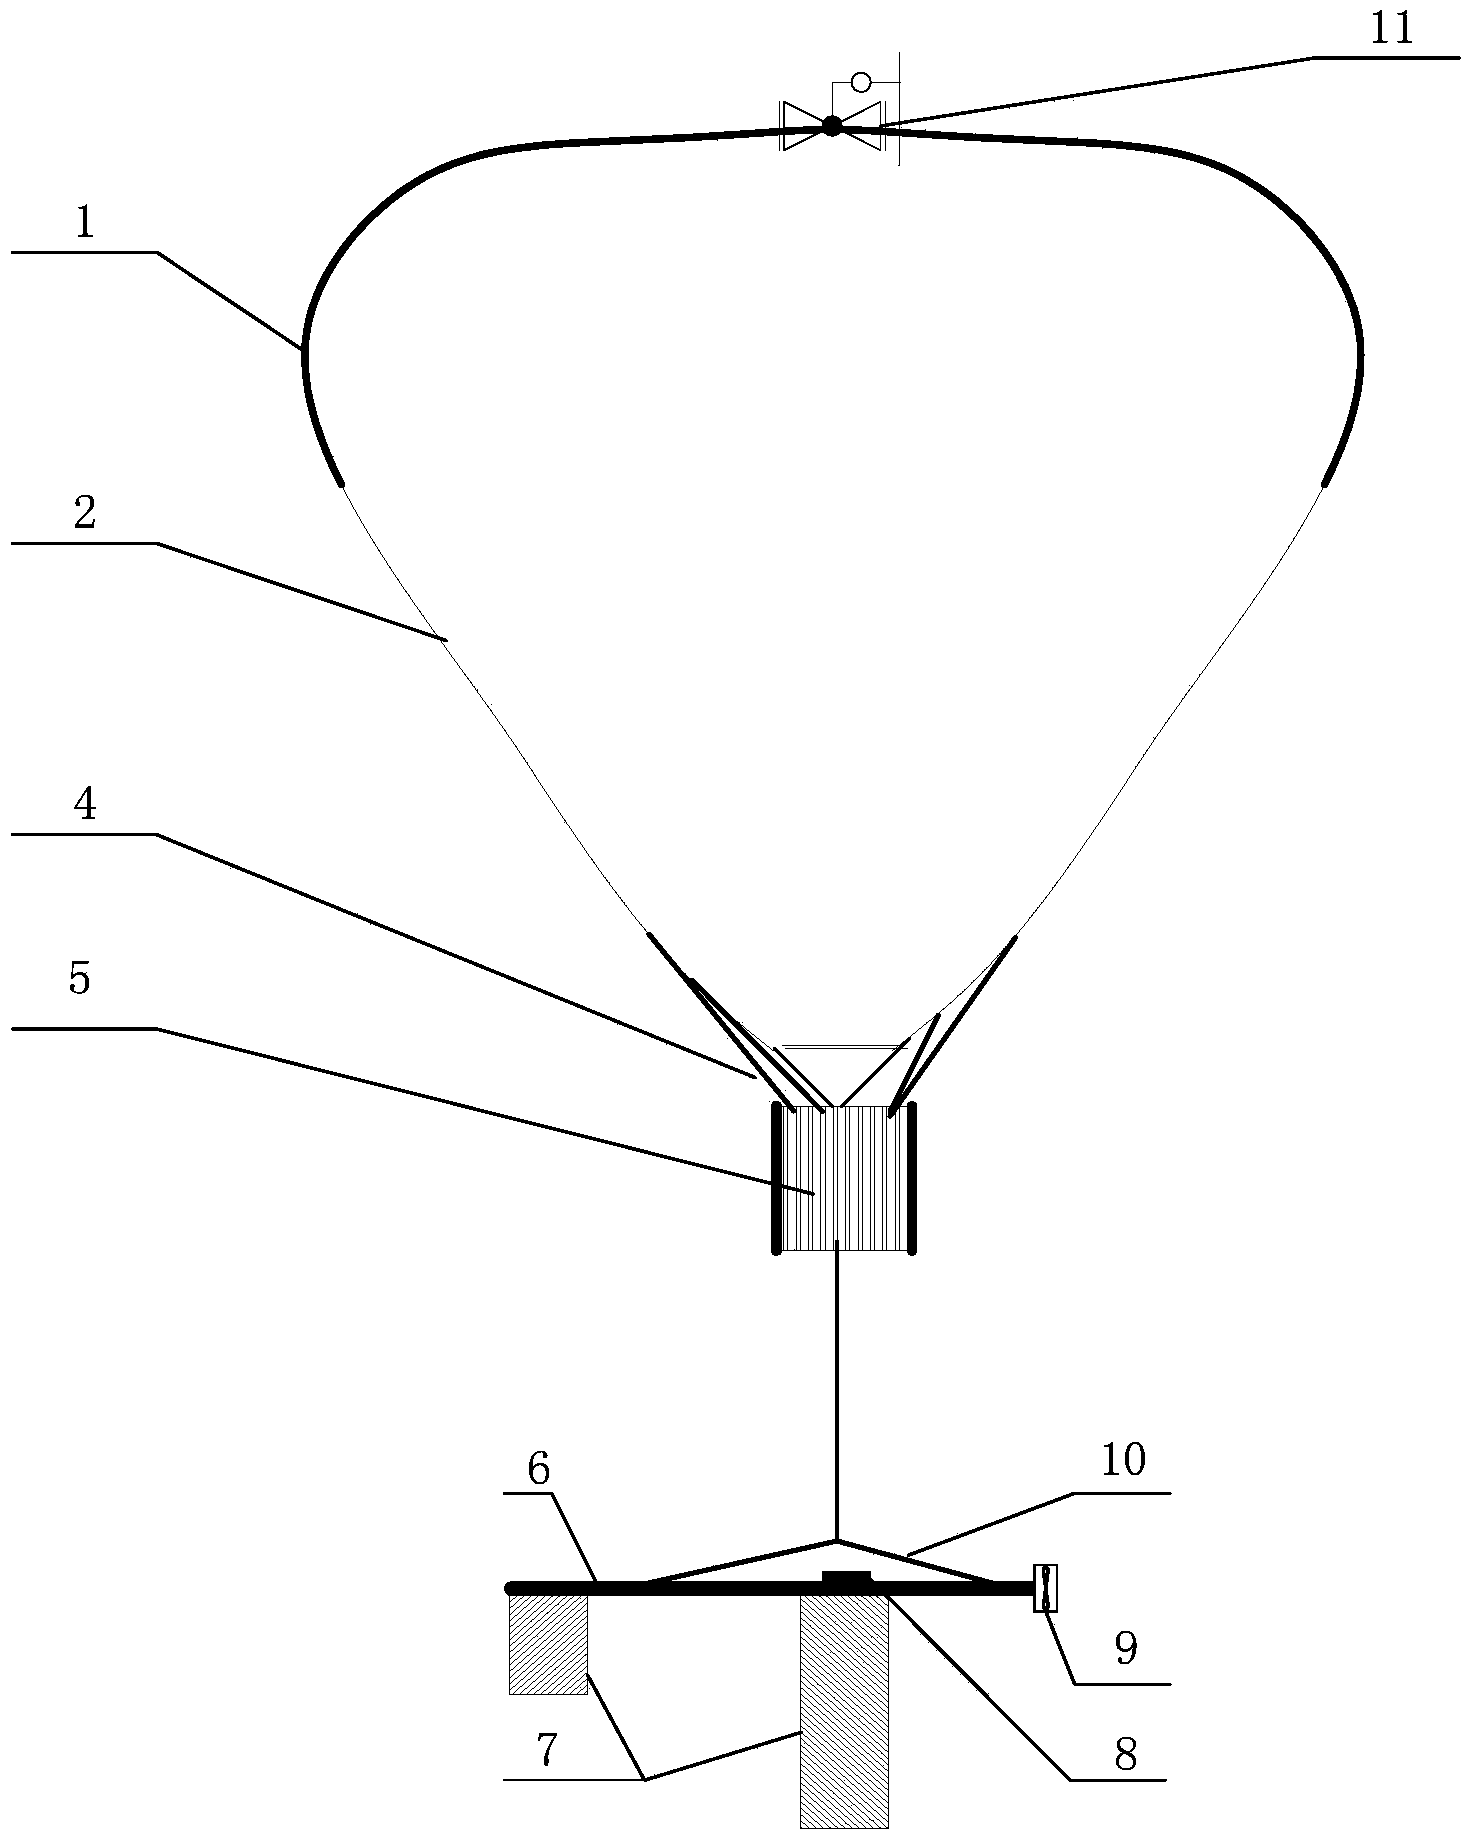 Natural heat and sail driven aerostat system with controllable track